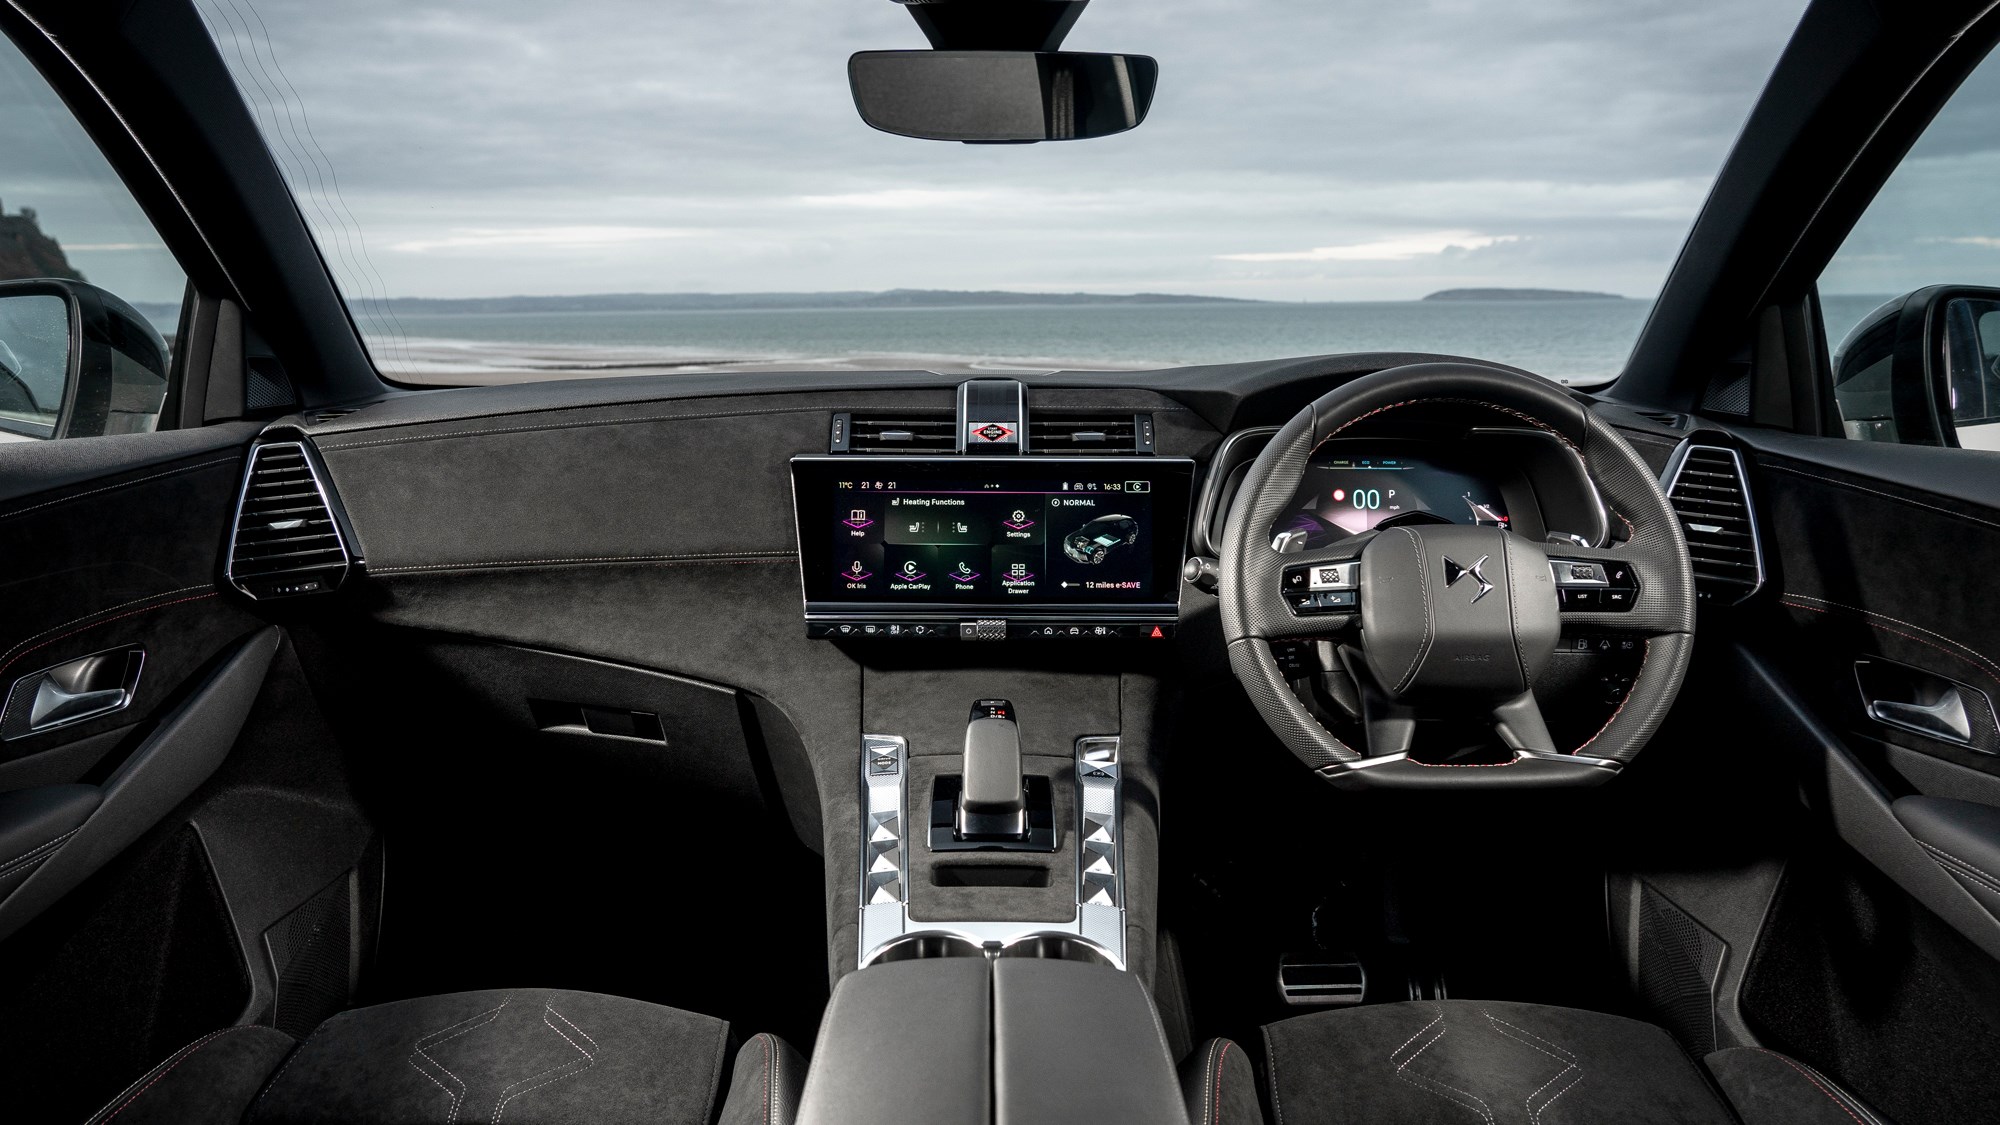 DS 7 (2023) review: dashboard and infotainment system, black and grey upholstery